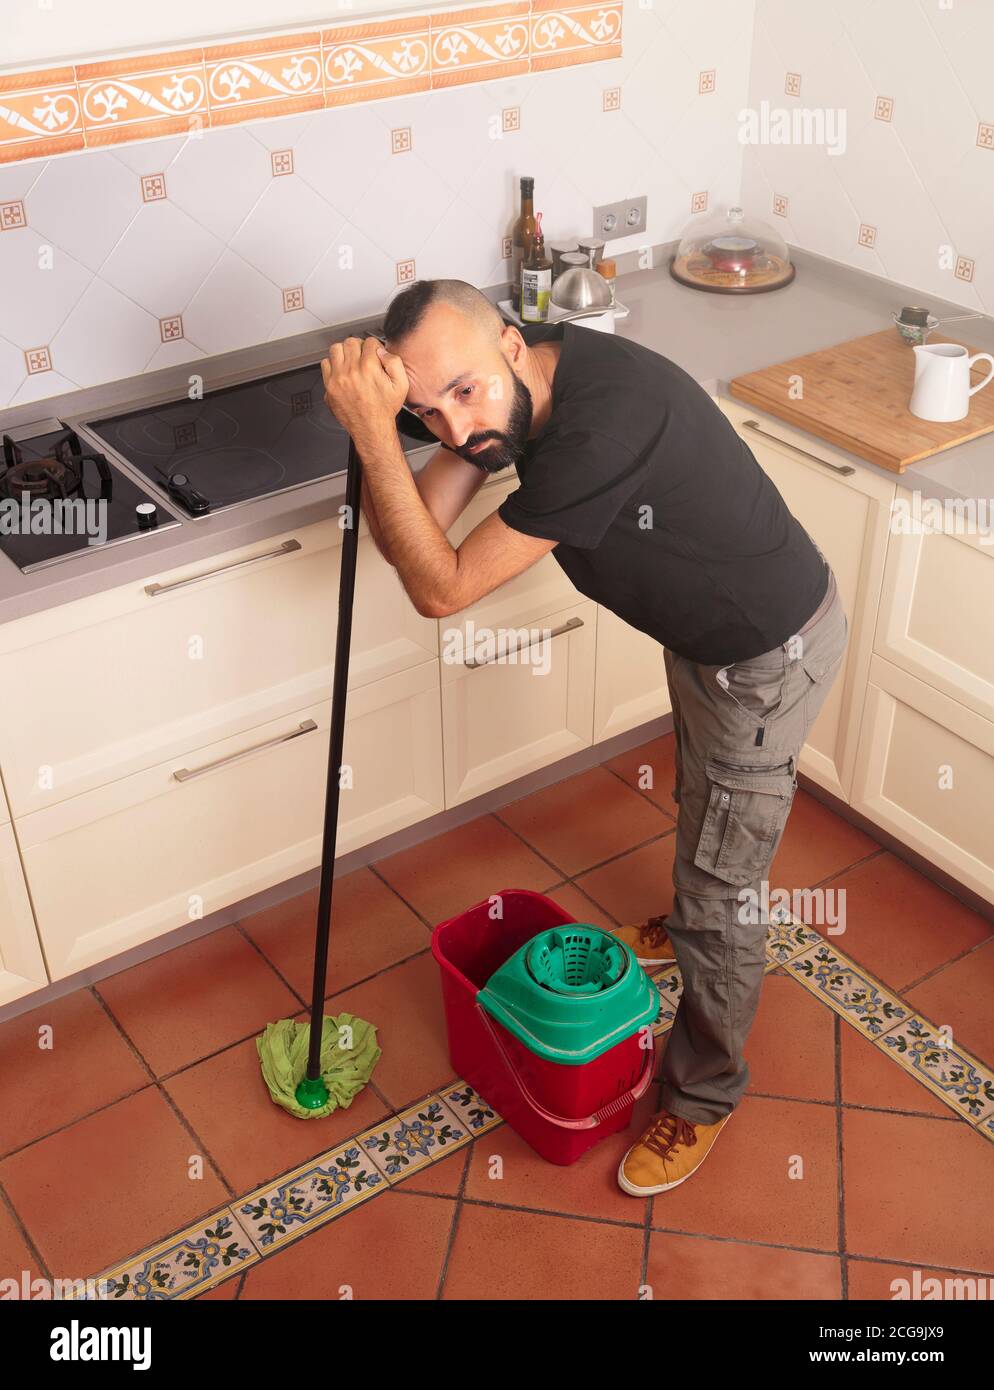 High angle view of a tired young hispanic man mopping the floor Stock Photo